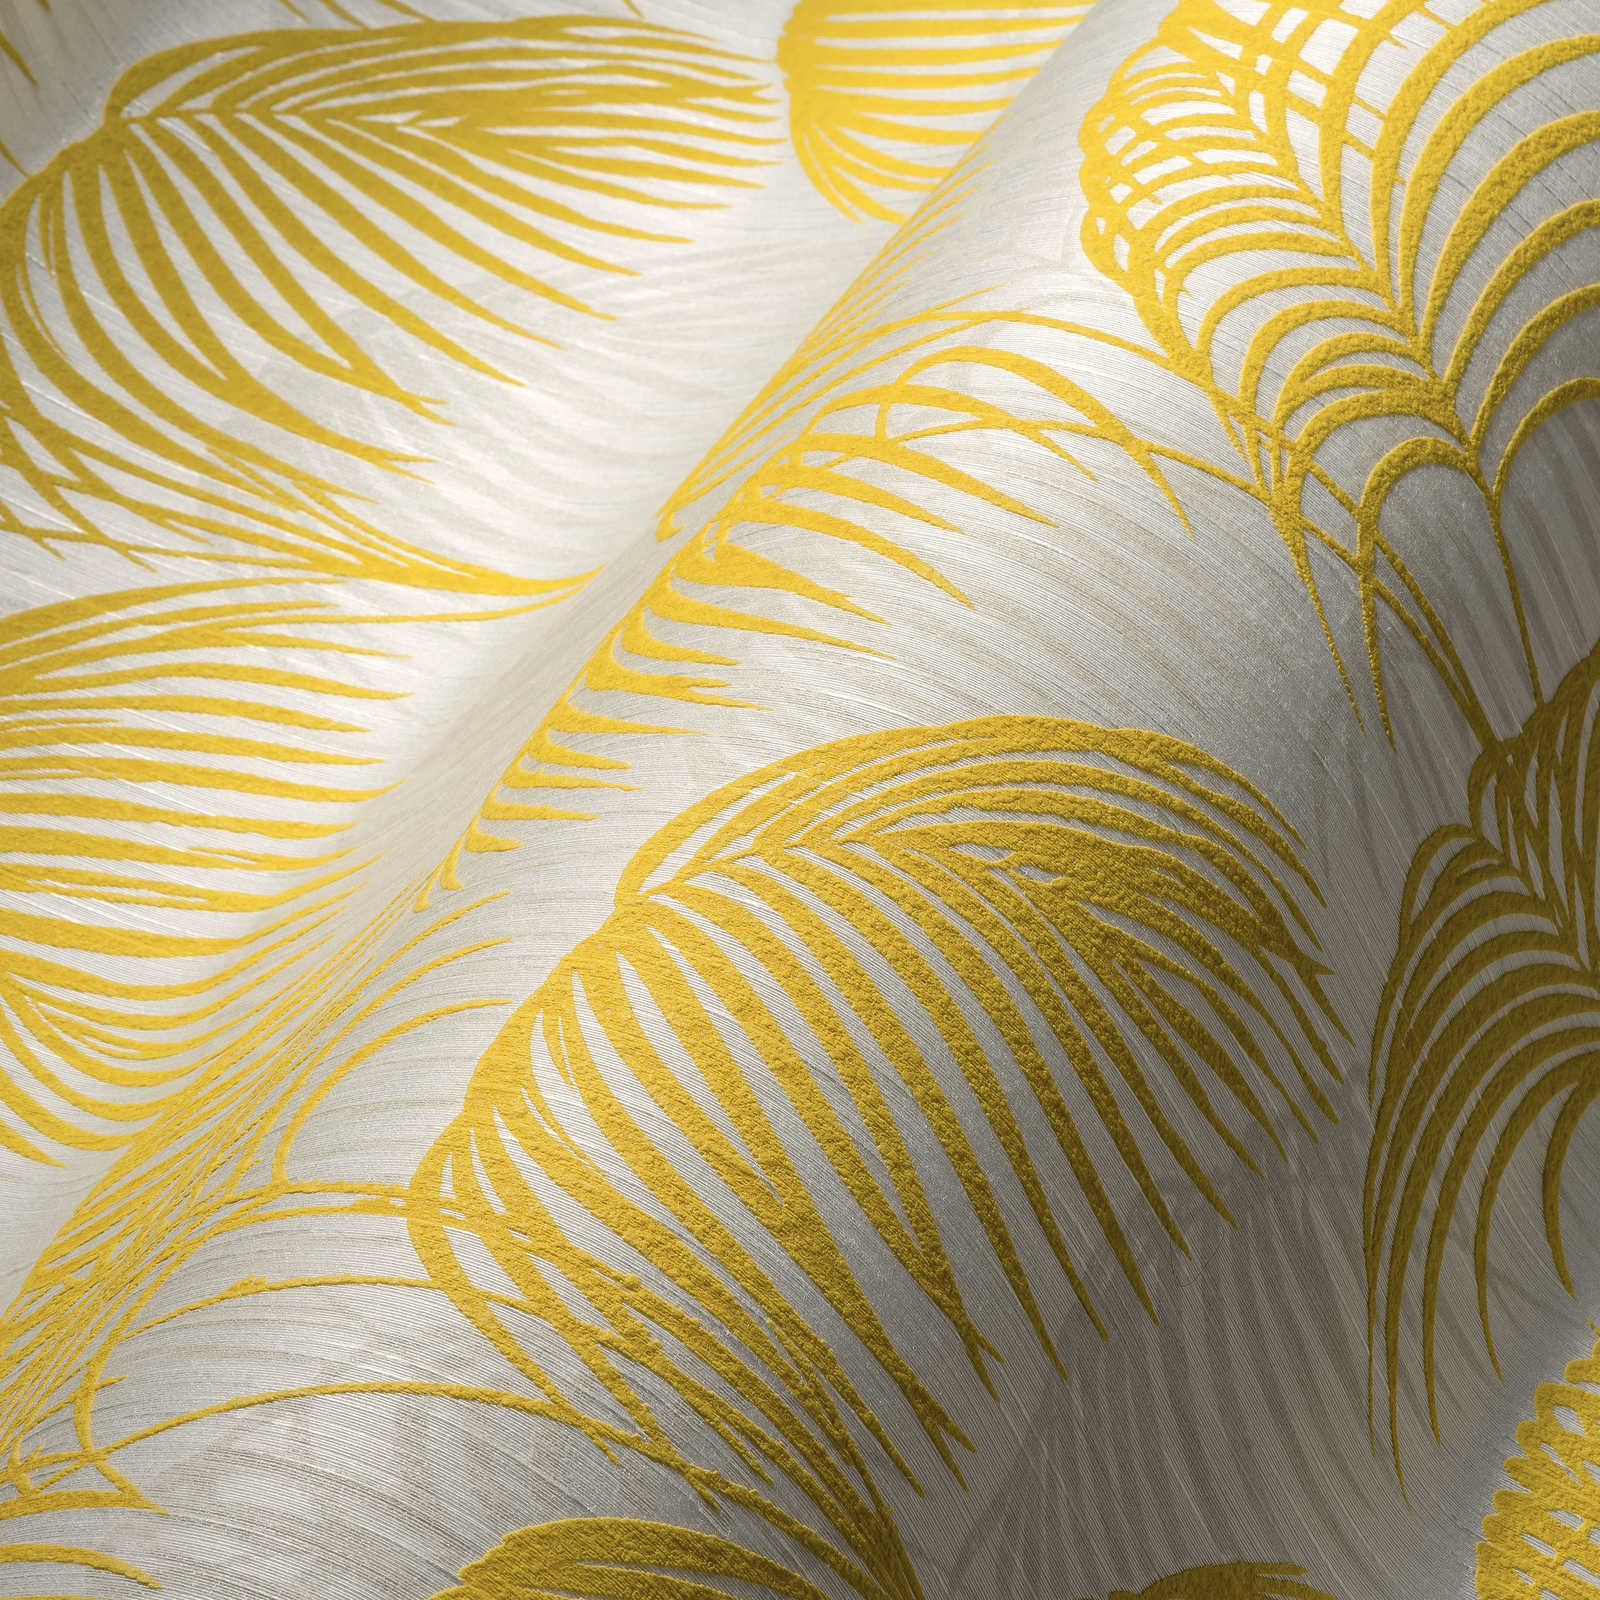             Palm wallpaper with gold effect & structure design - metallic, white
        